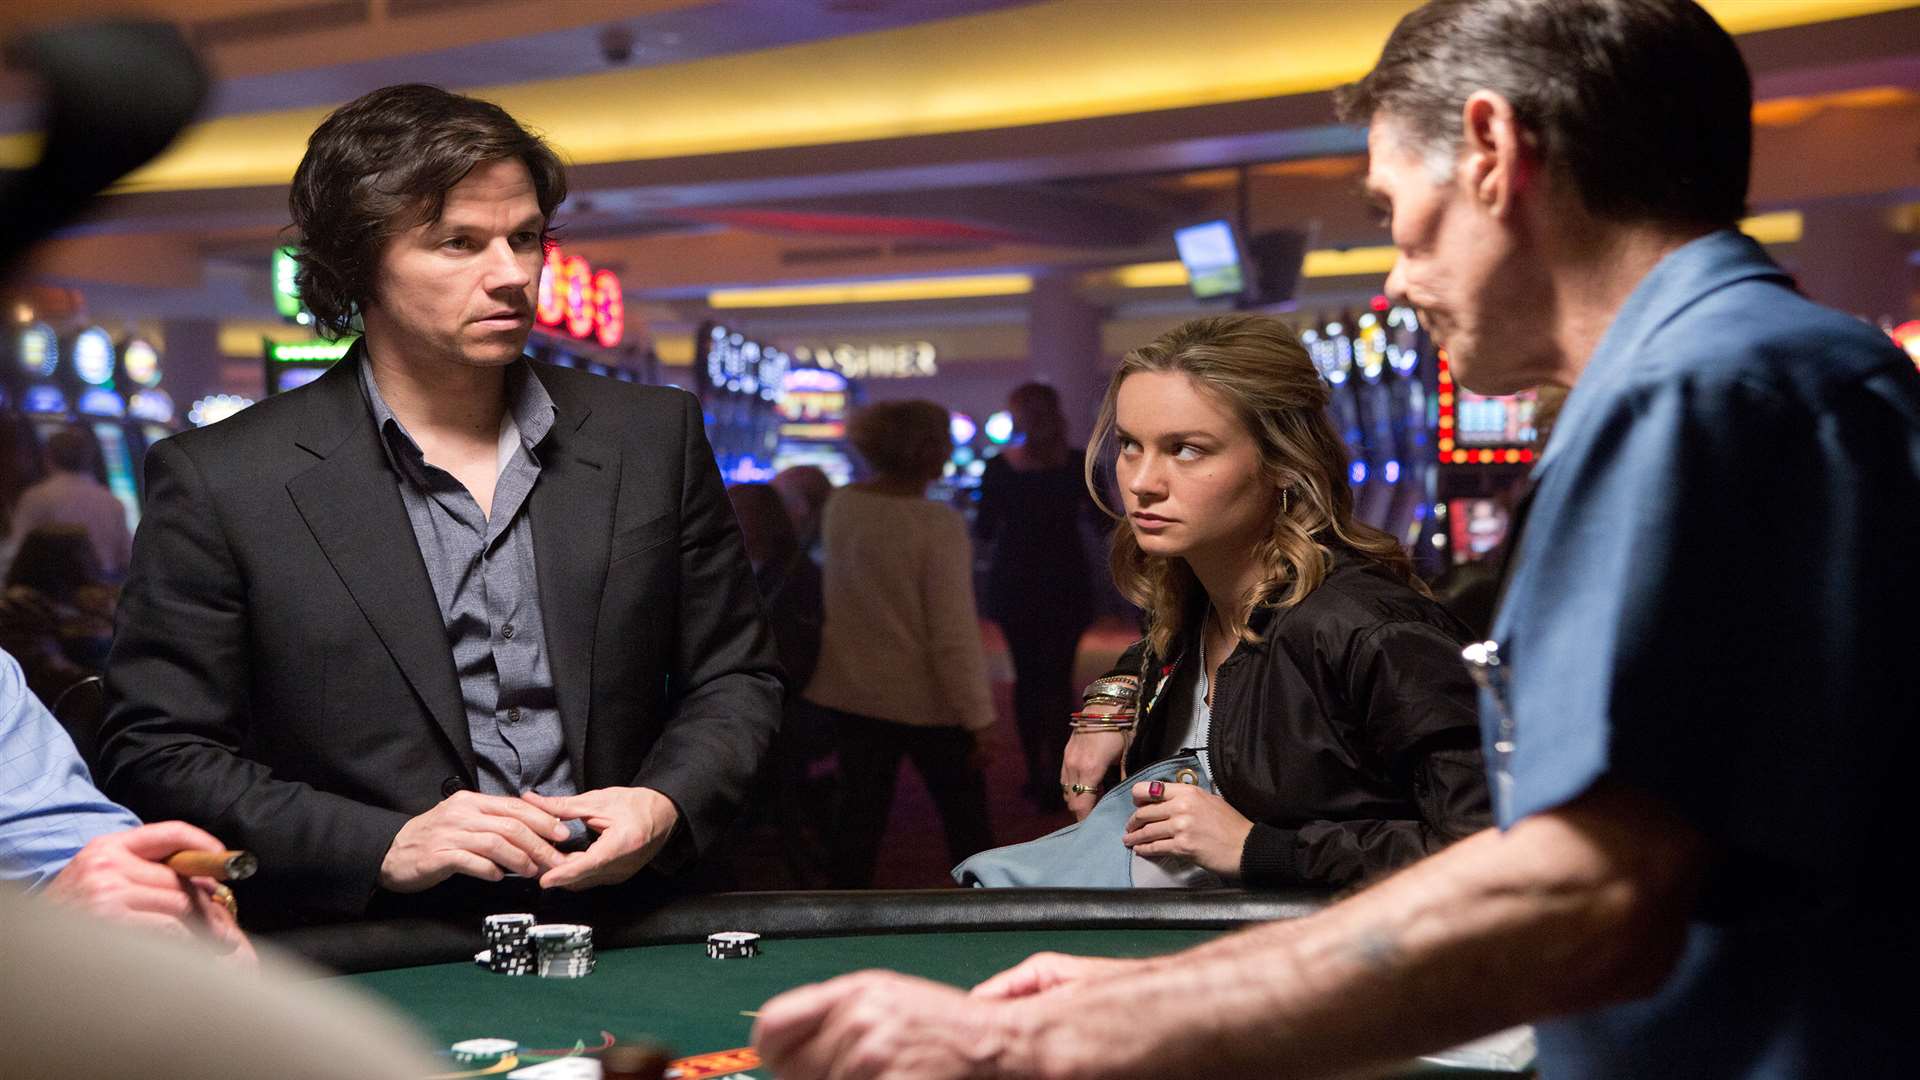 The Gambler, with Mark Wahlberg as Jim Bennett and Brie Larson as Amy. Picture: PA Photo/Claire Folger/Paramount Pictures